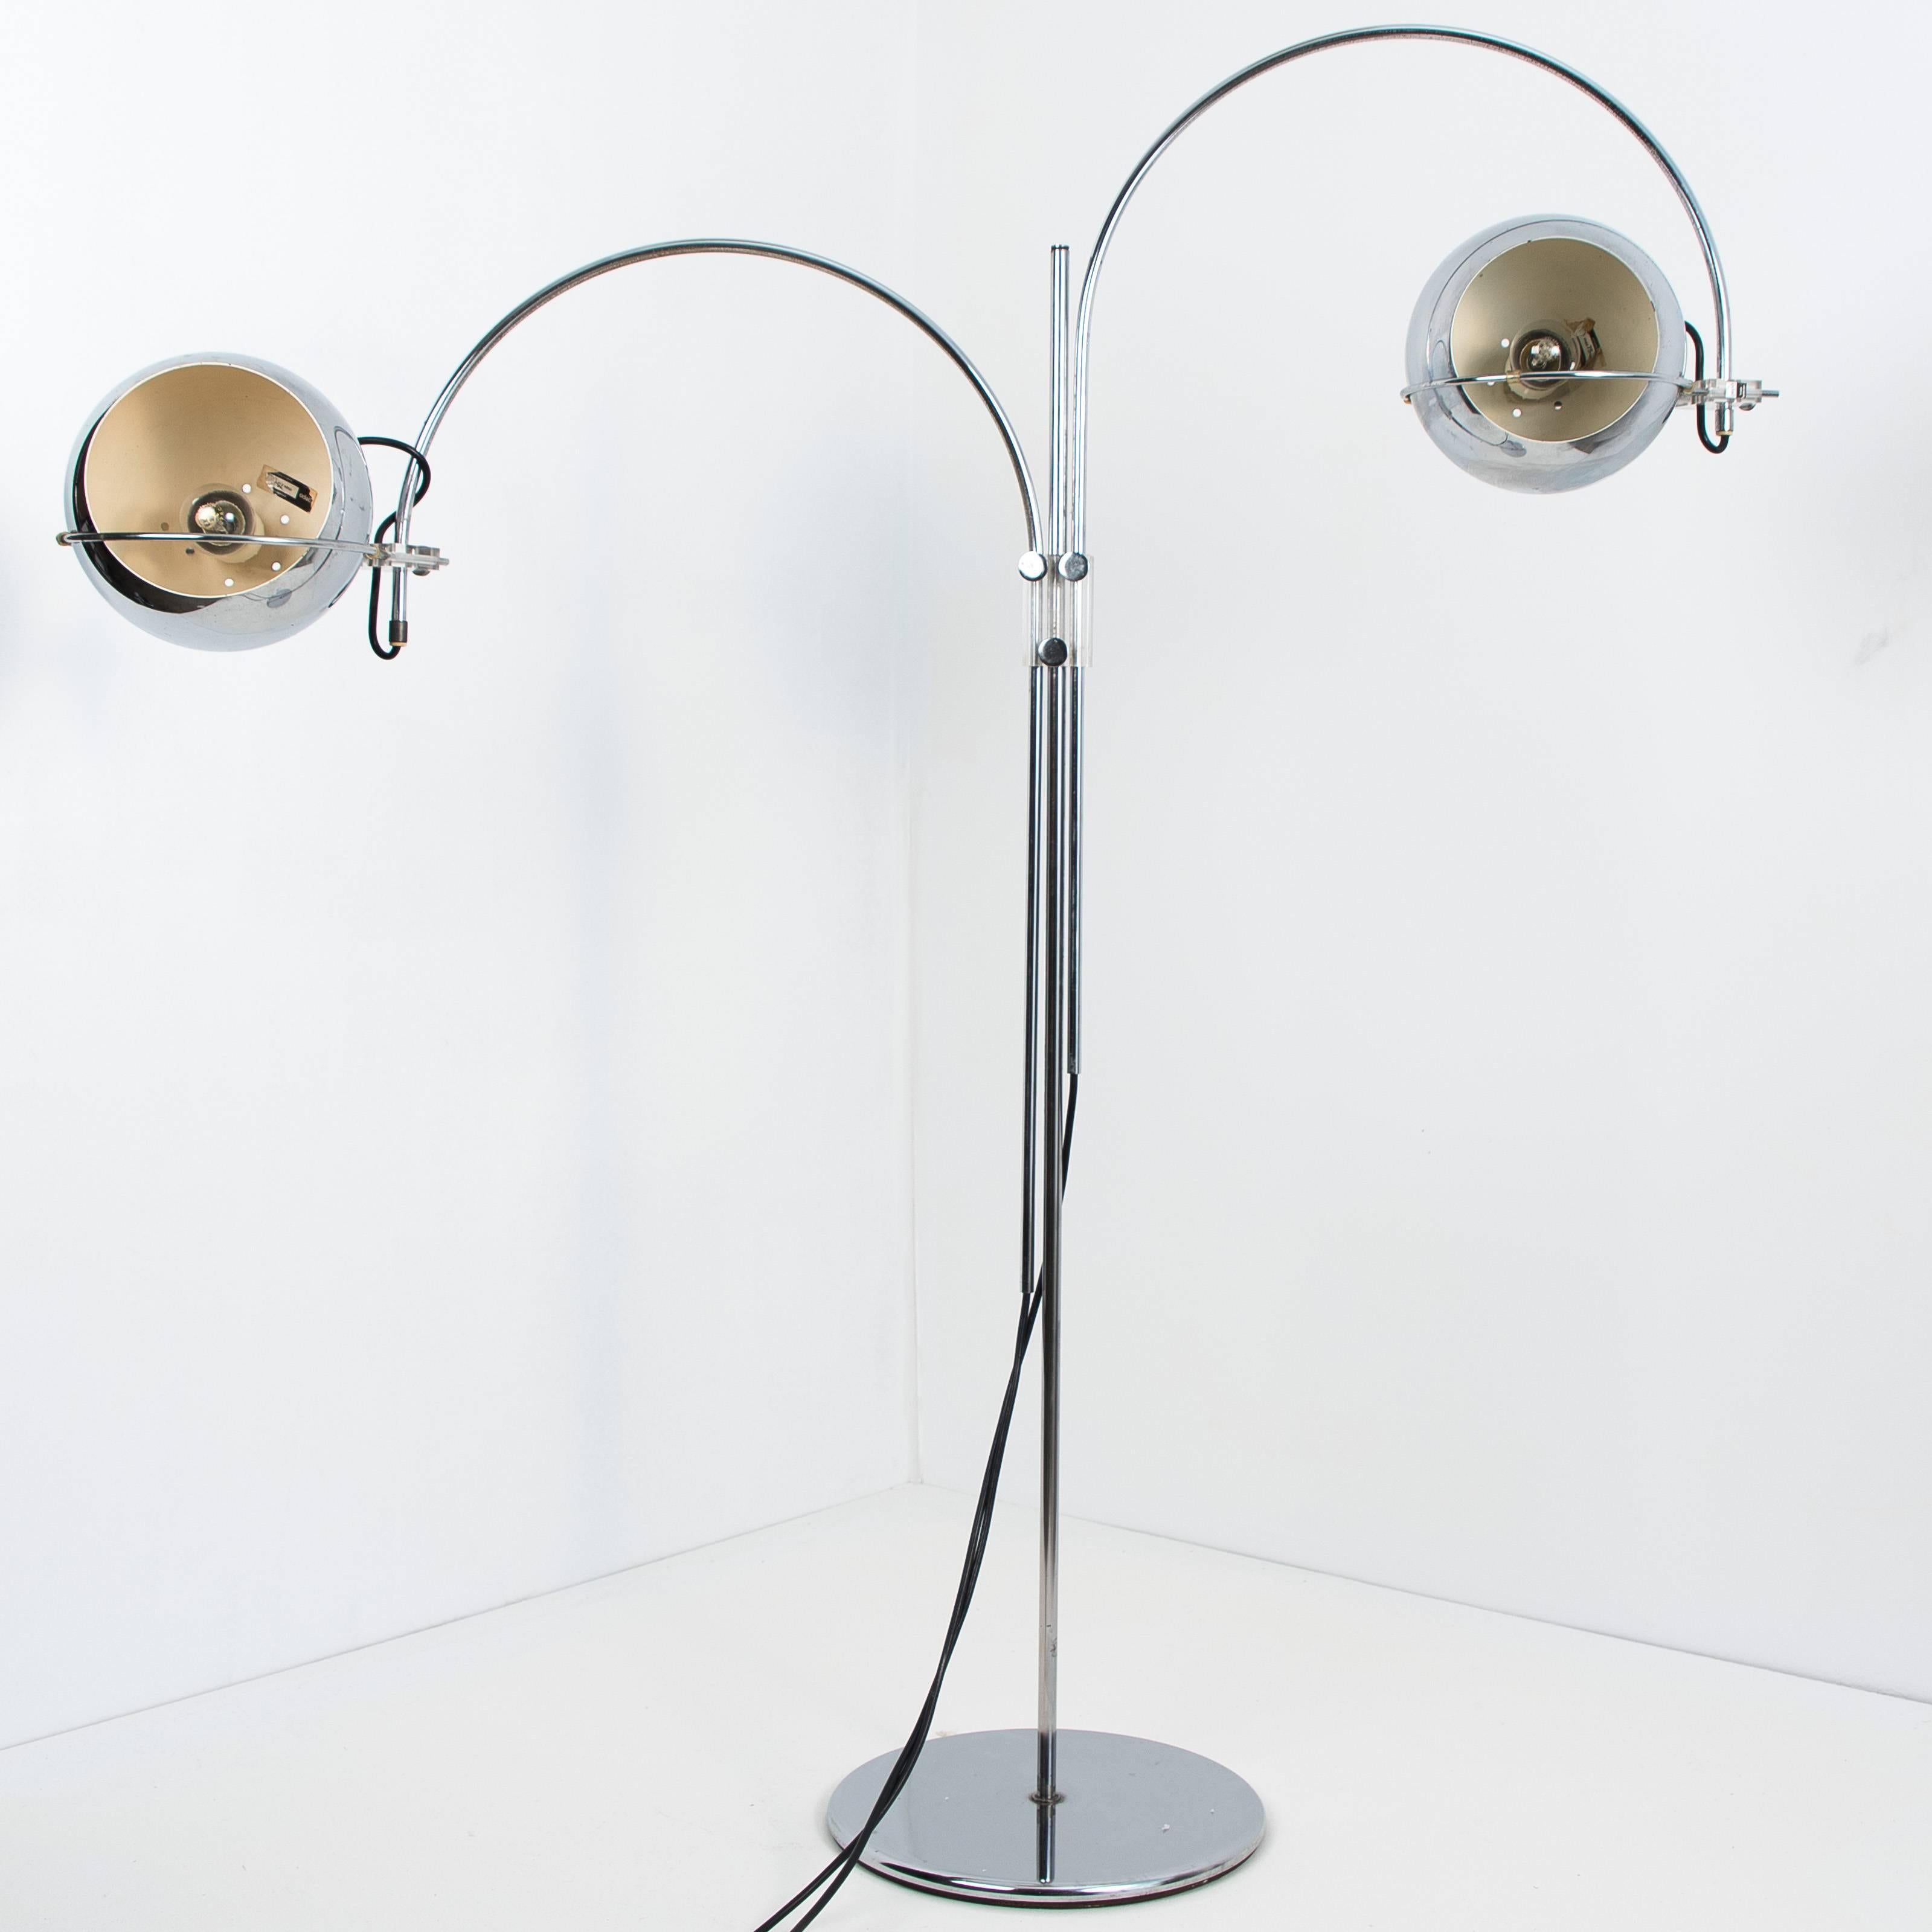 Dutch Chrome Floor Lamp from Gepo, Double Eye-Ball, 1960s at 1stDibs